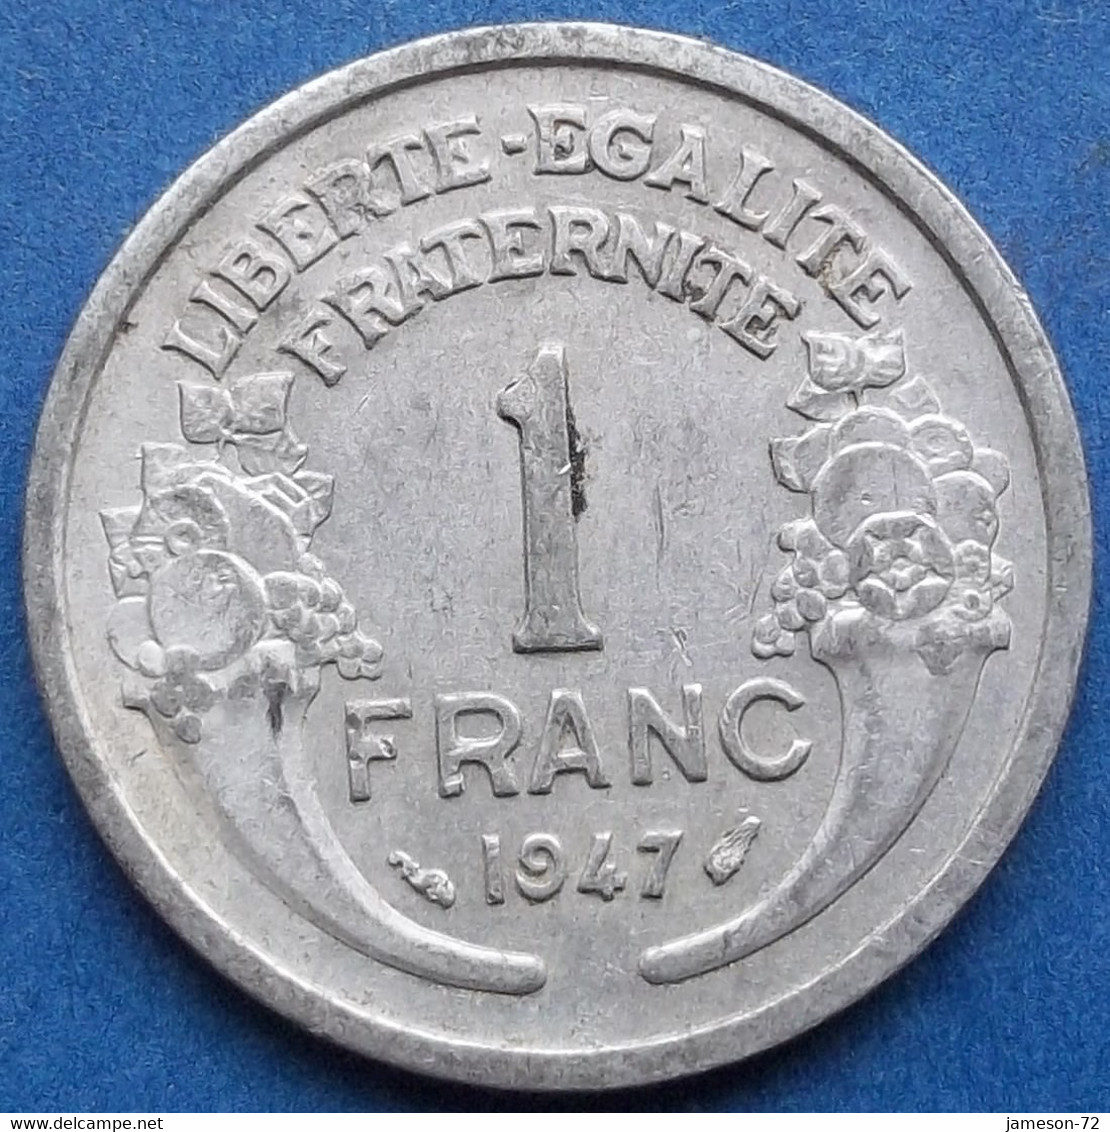 FRANCE - 1 Franc 1947 KM# 885a.1 De Gaulles Provisional Government (1944-1947) - Edelweiss Coins - 1 Franc